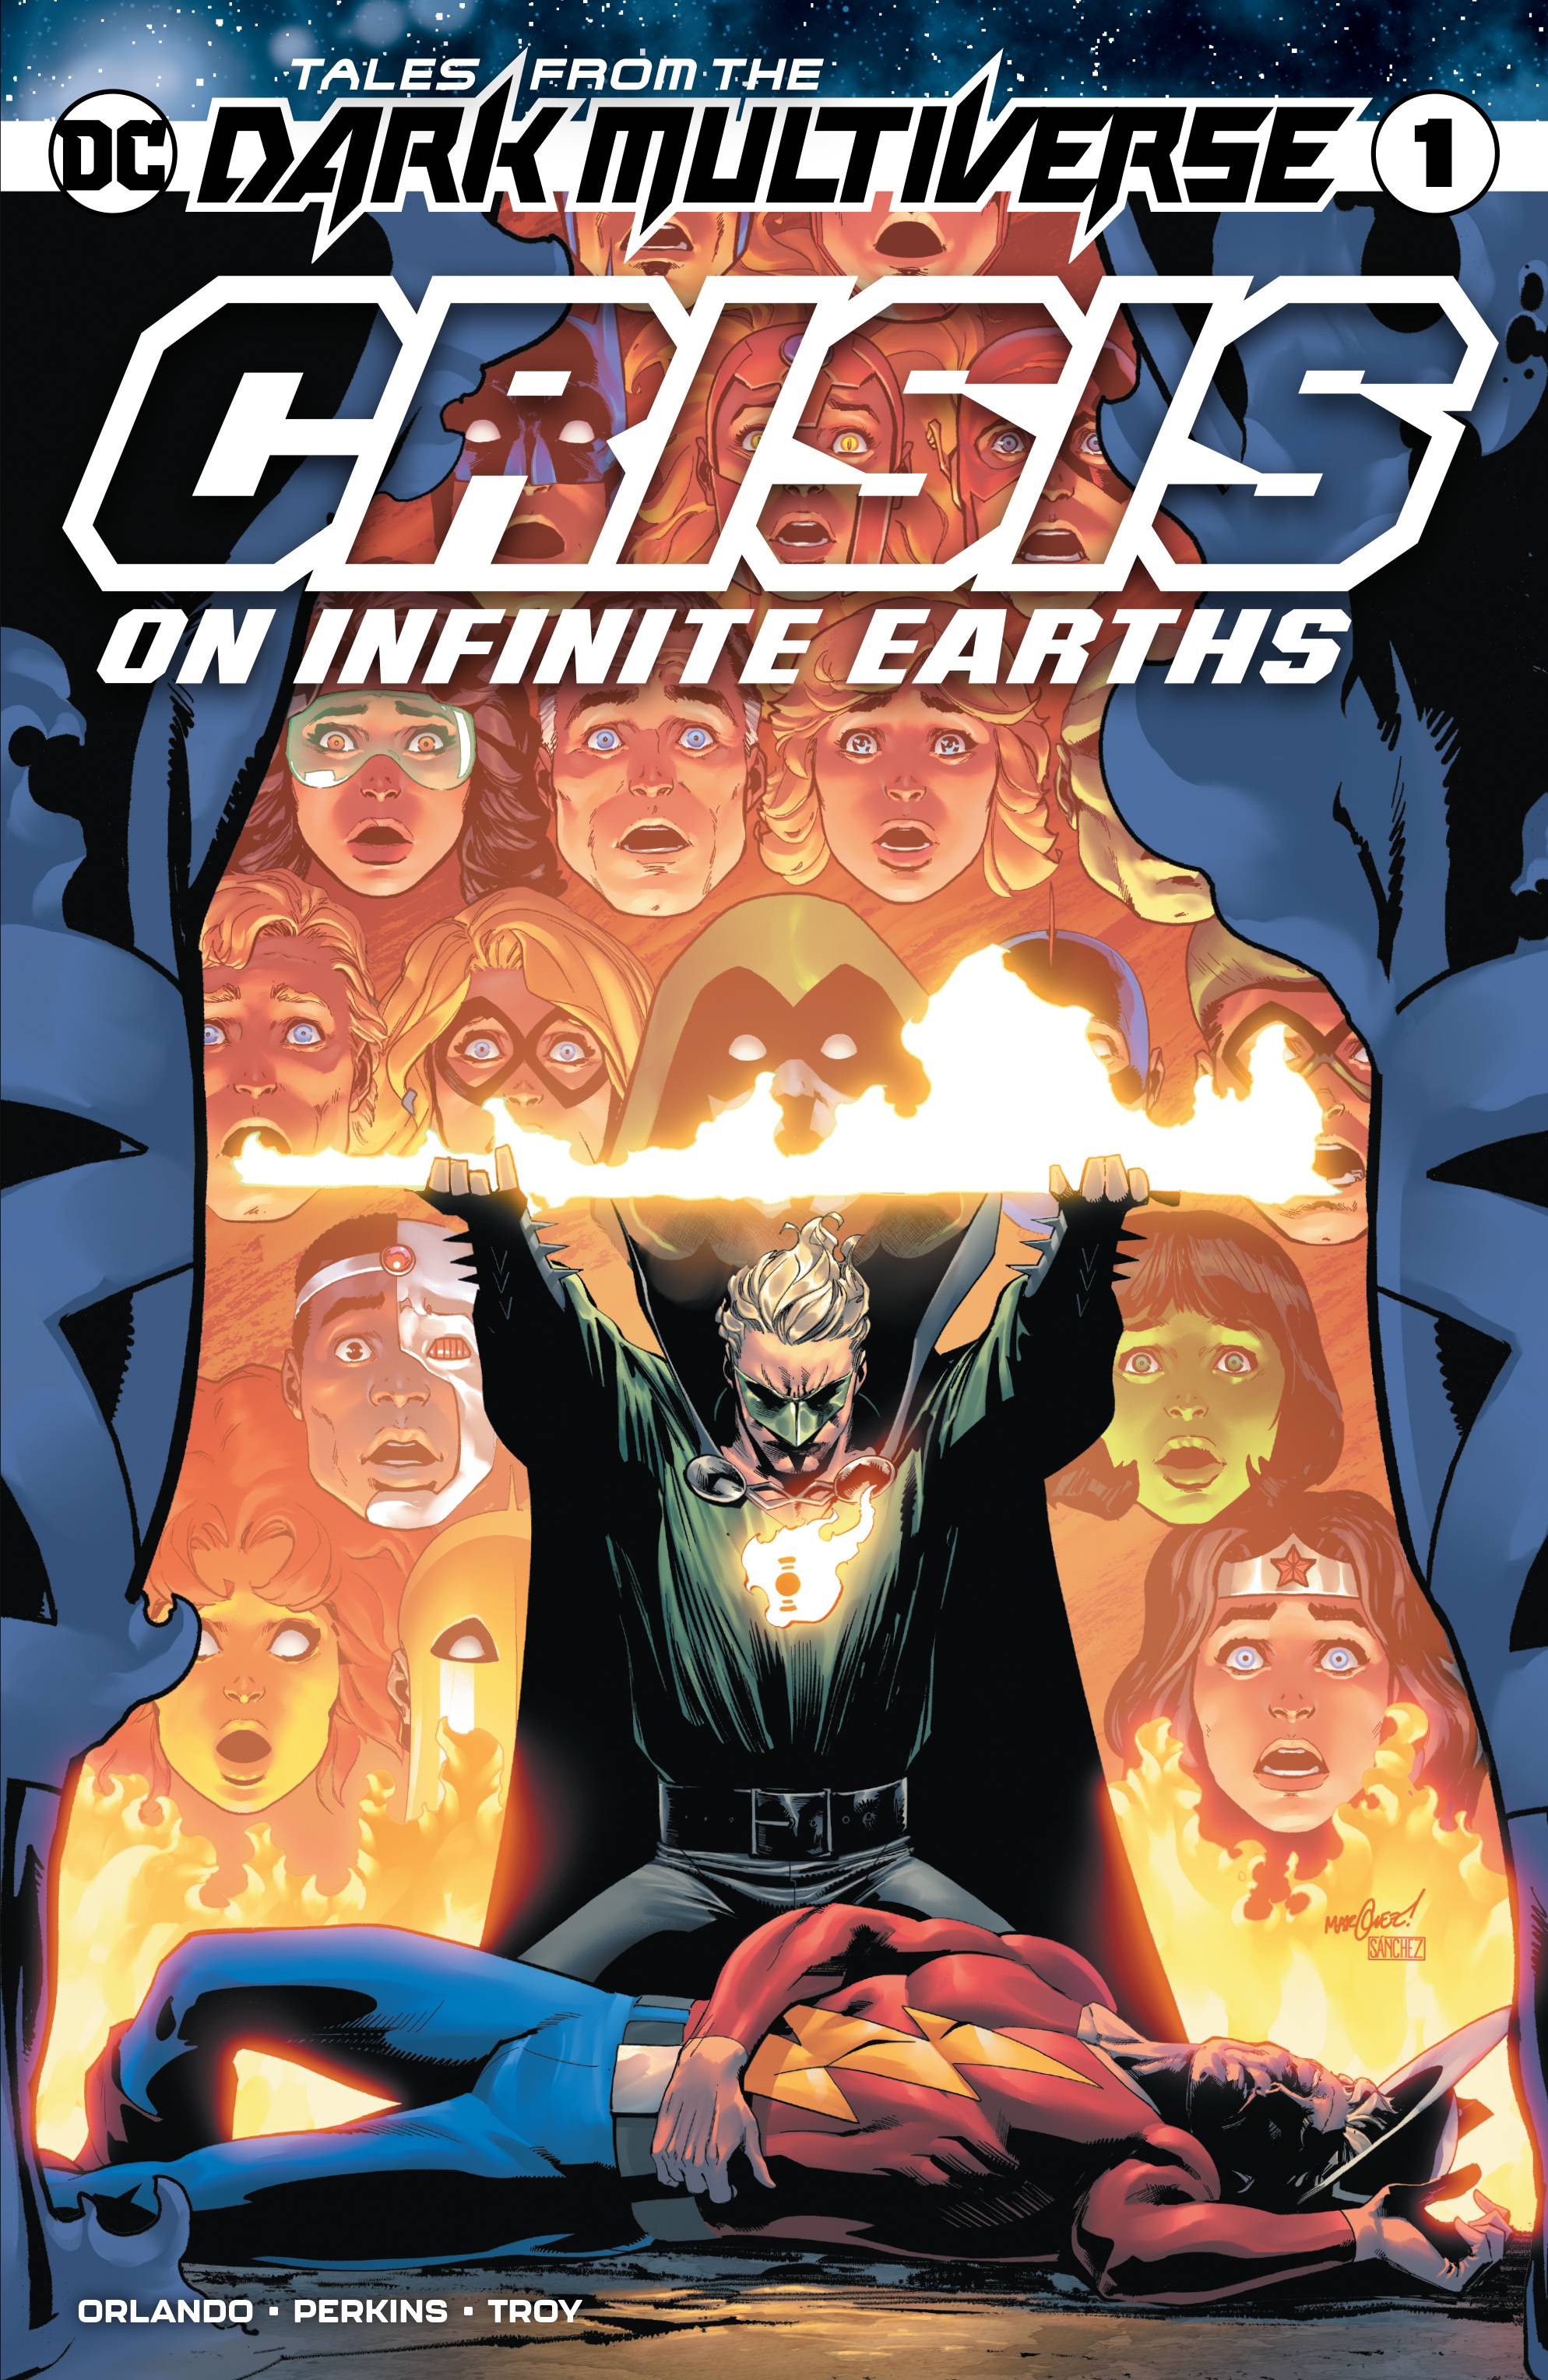 TALES OF THE DARK MULTIVERSE CRISIS ON INFINITE EARTHS #1